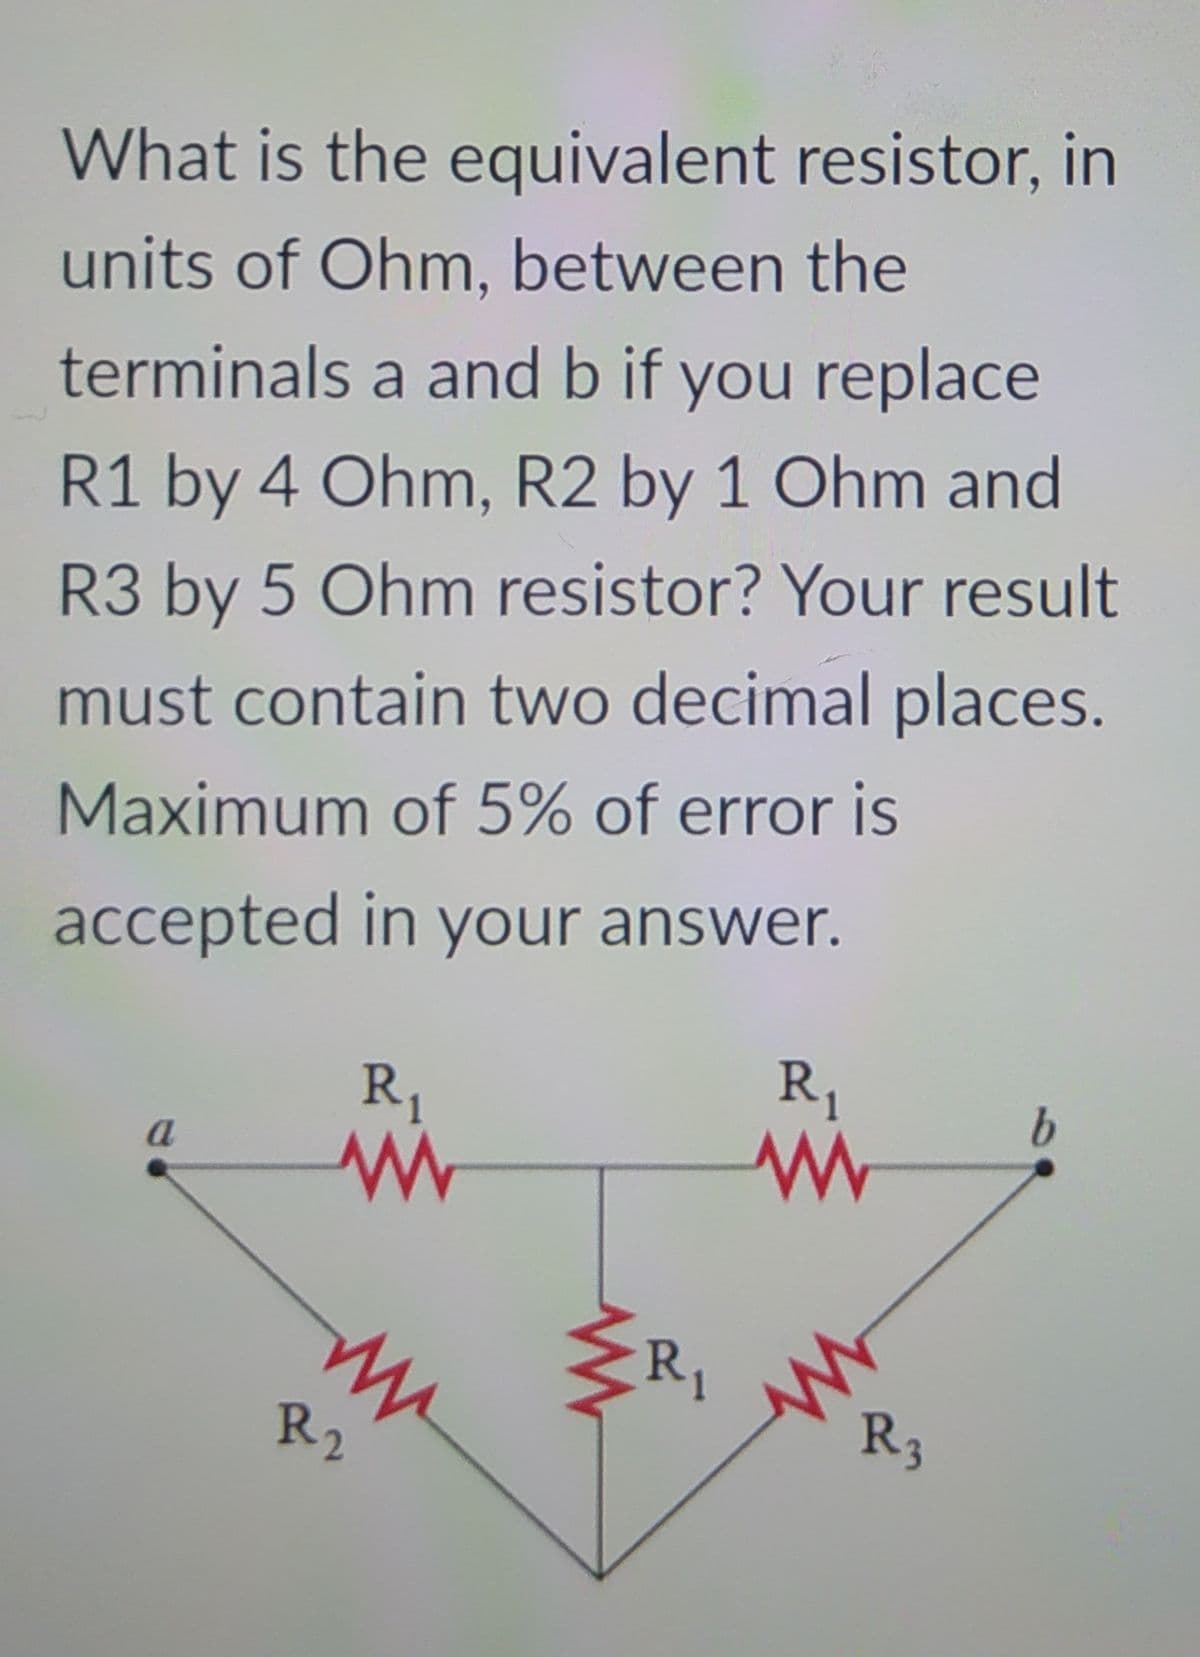 What is the equivalent resistor, in
units of Ohm, between the
terminals a and b if you replace
R1 by 4 Ohm, R2 by 1 Ohm and
R3 by 5 Ohm resistor? Your result
must contain two decimal places.
Maximum of 5% of error is
accepted in your answer.
R1
R,
a
R1
R2
R3
